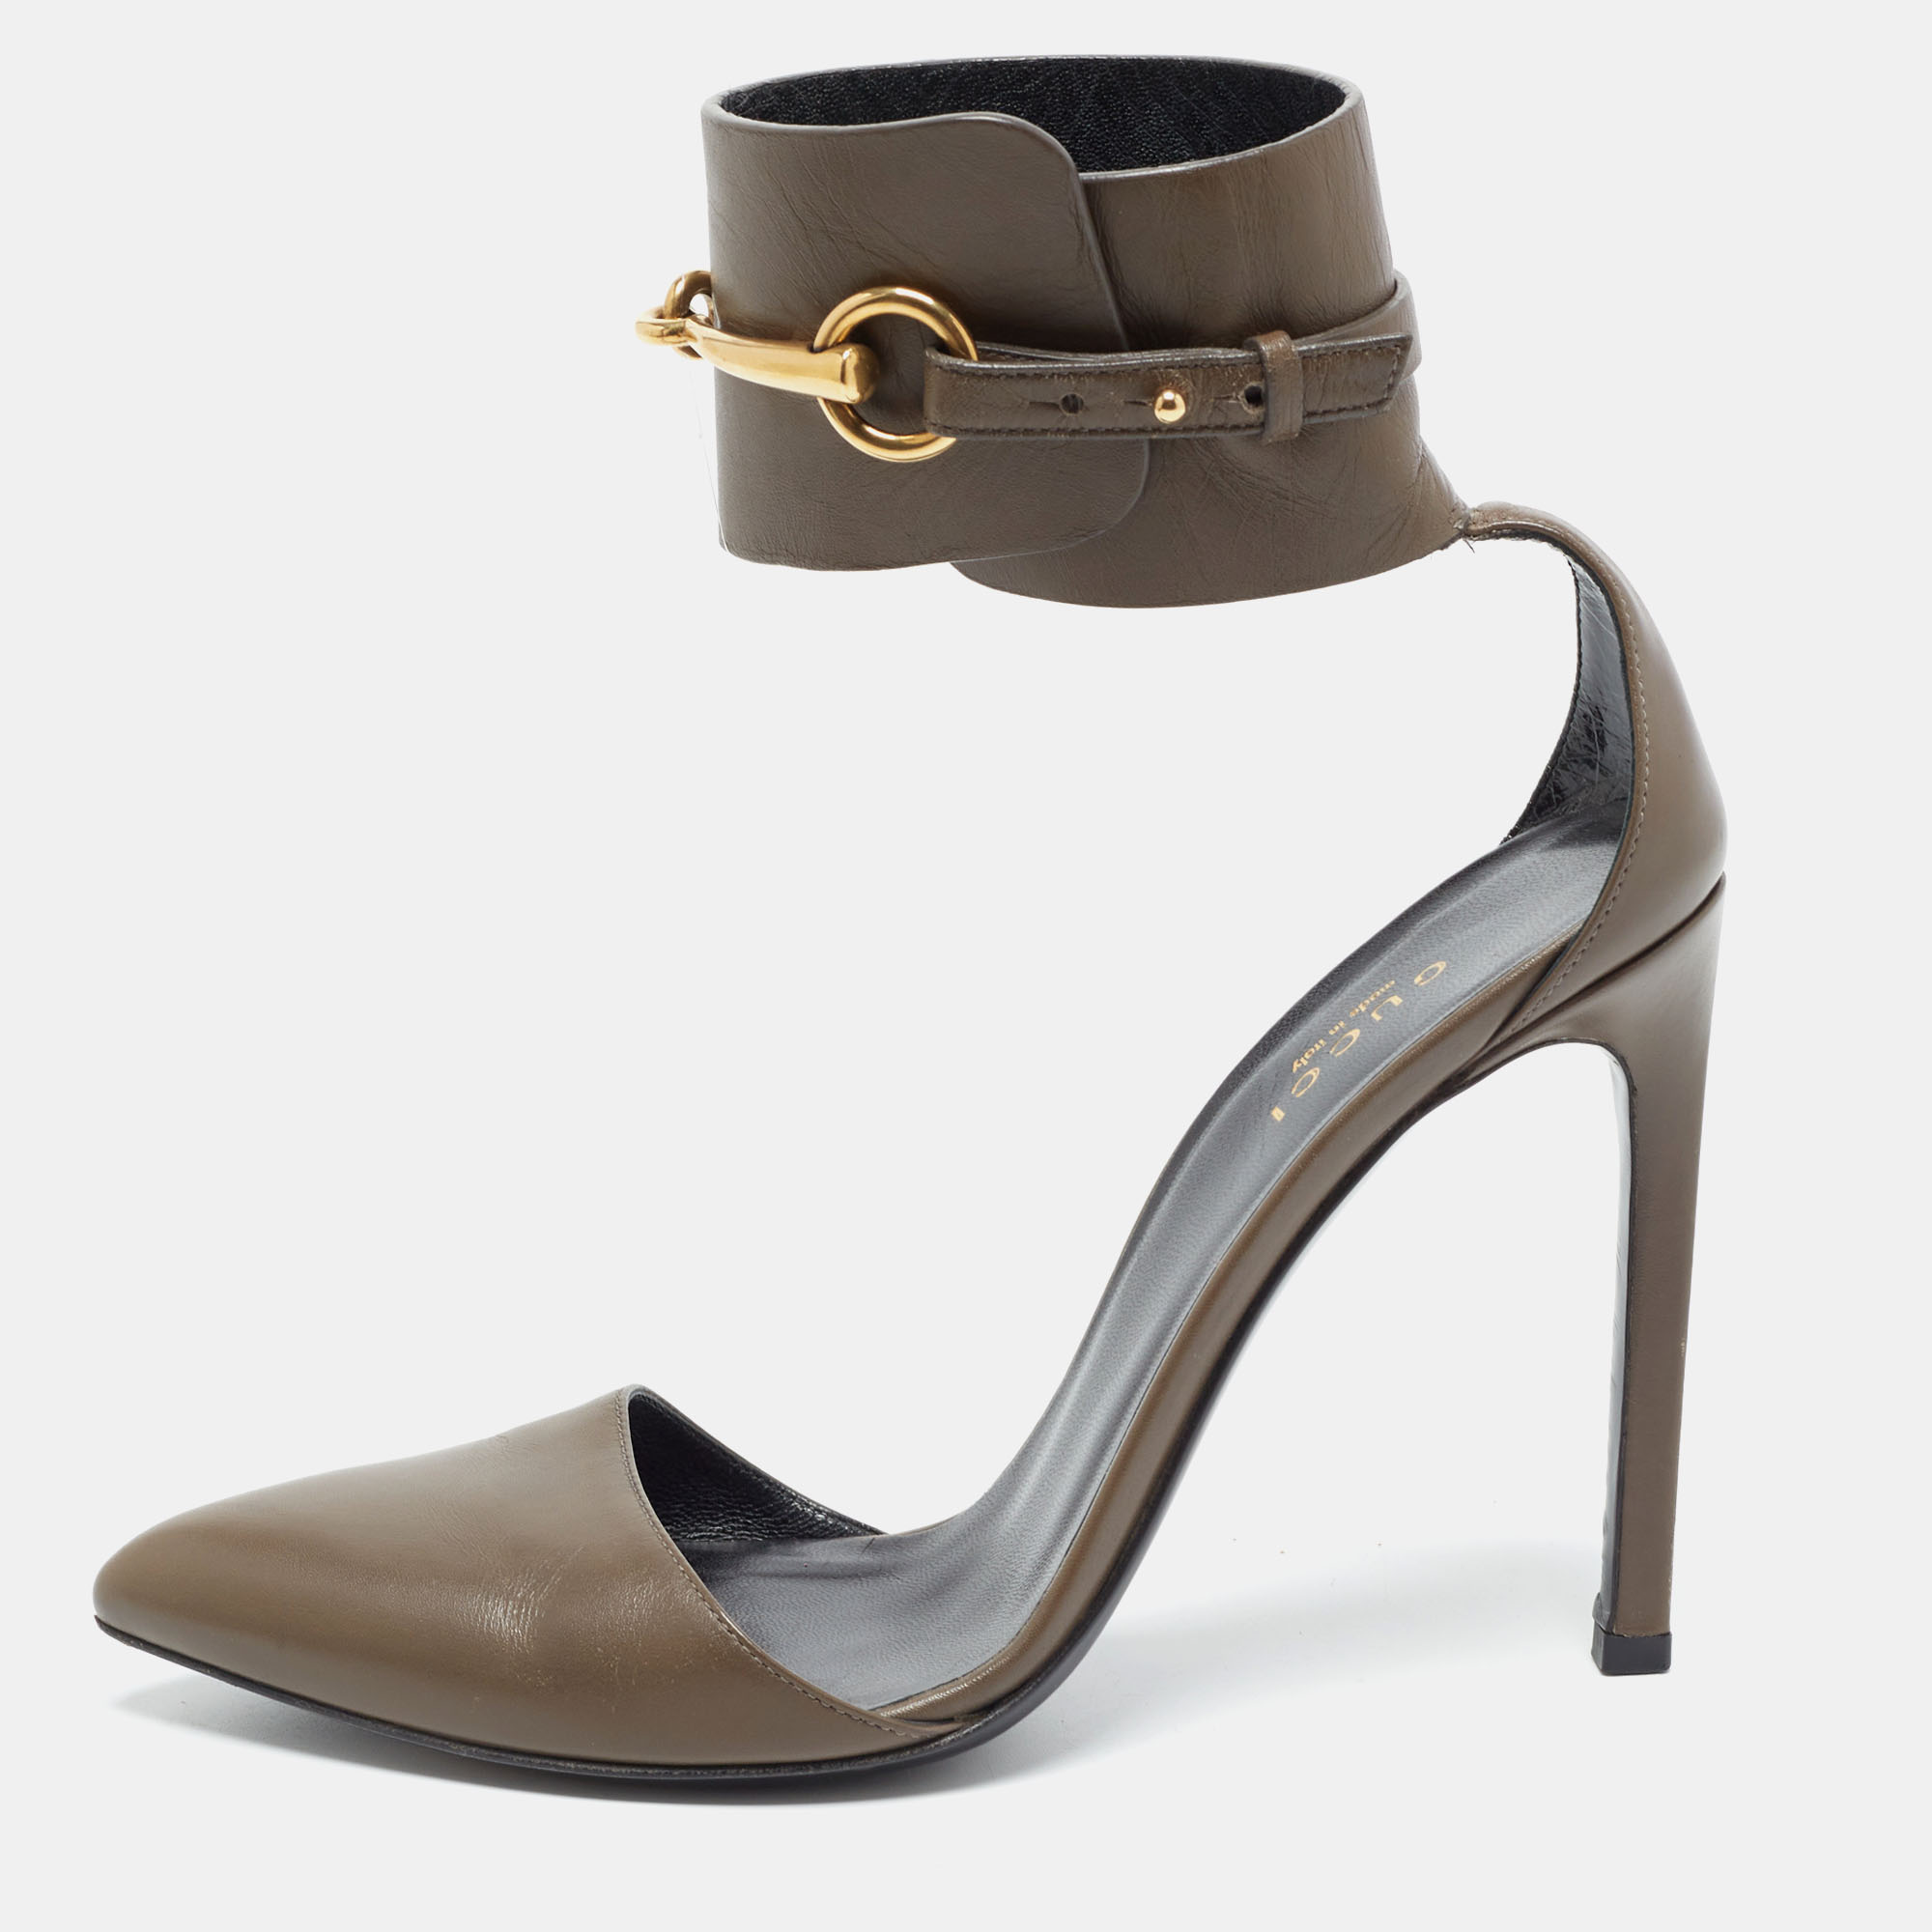 Make a statement with these Gucci pumps for women. Impeccably crafted these chic heels offer both fashion and comfort elevating your look with each graceful step.